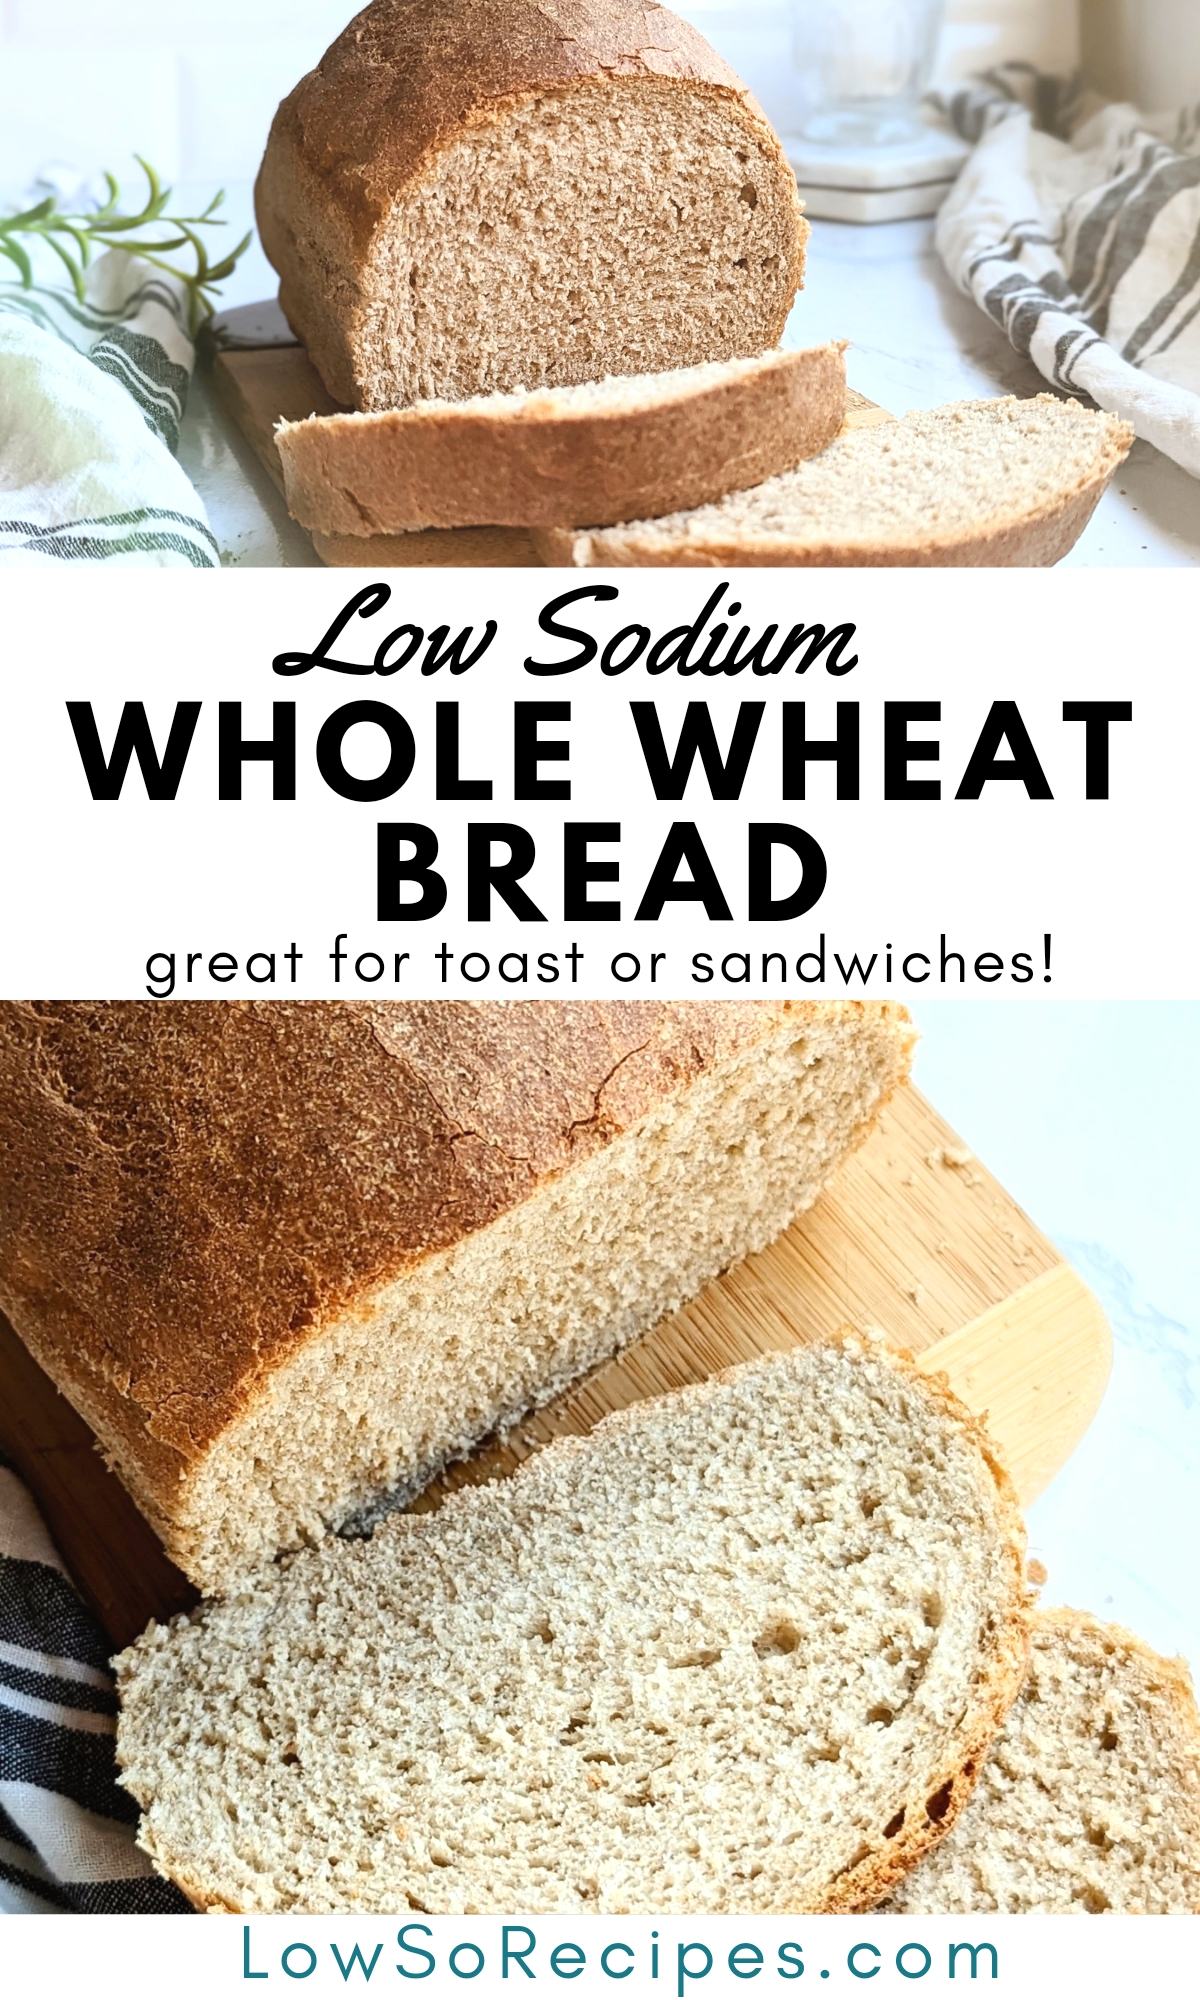 low sodium wheat bread recipe low salt healthy unsalted bread with whole wheat flour